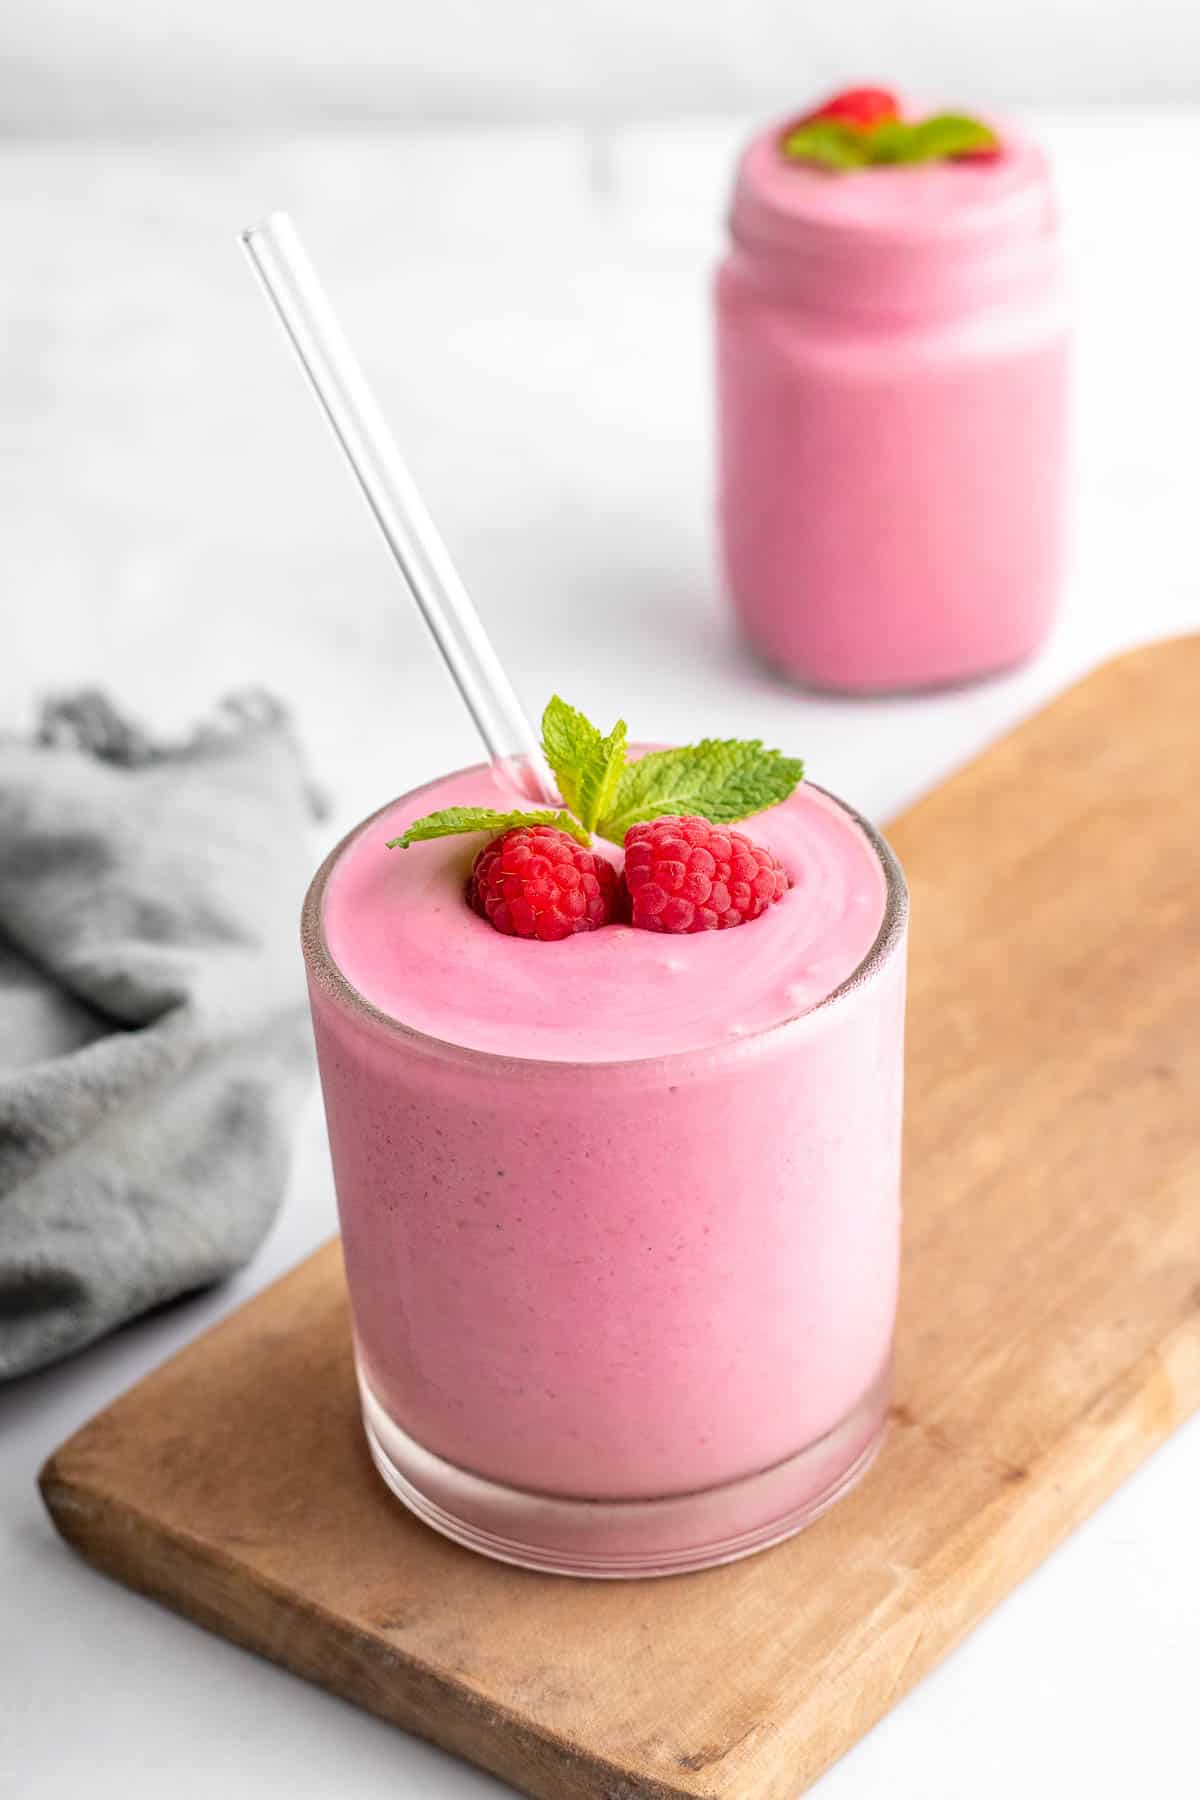 Smoothie in a glass jar with a straw, garnished with fresh raspberries